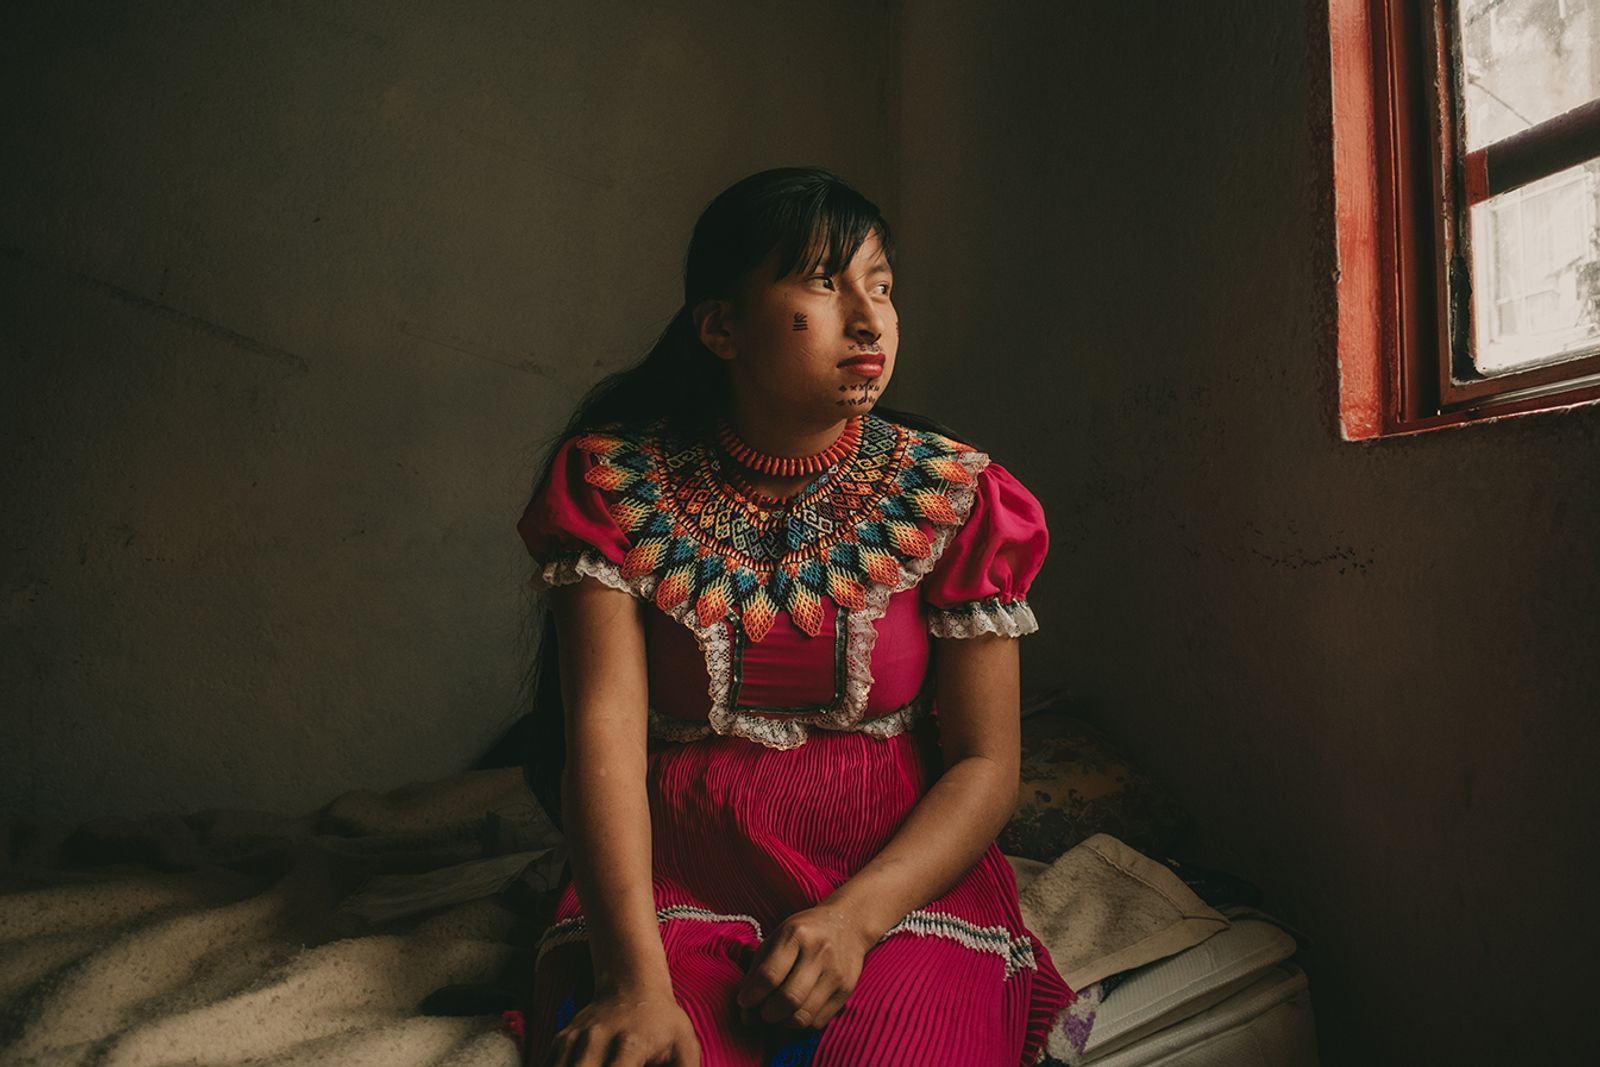 © JNicolasBernal - Image from the Ambachacke émbera chamí (The Mountain People Family) photography project